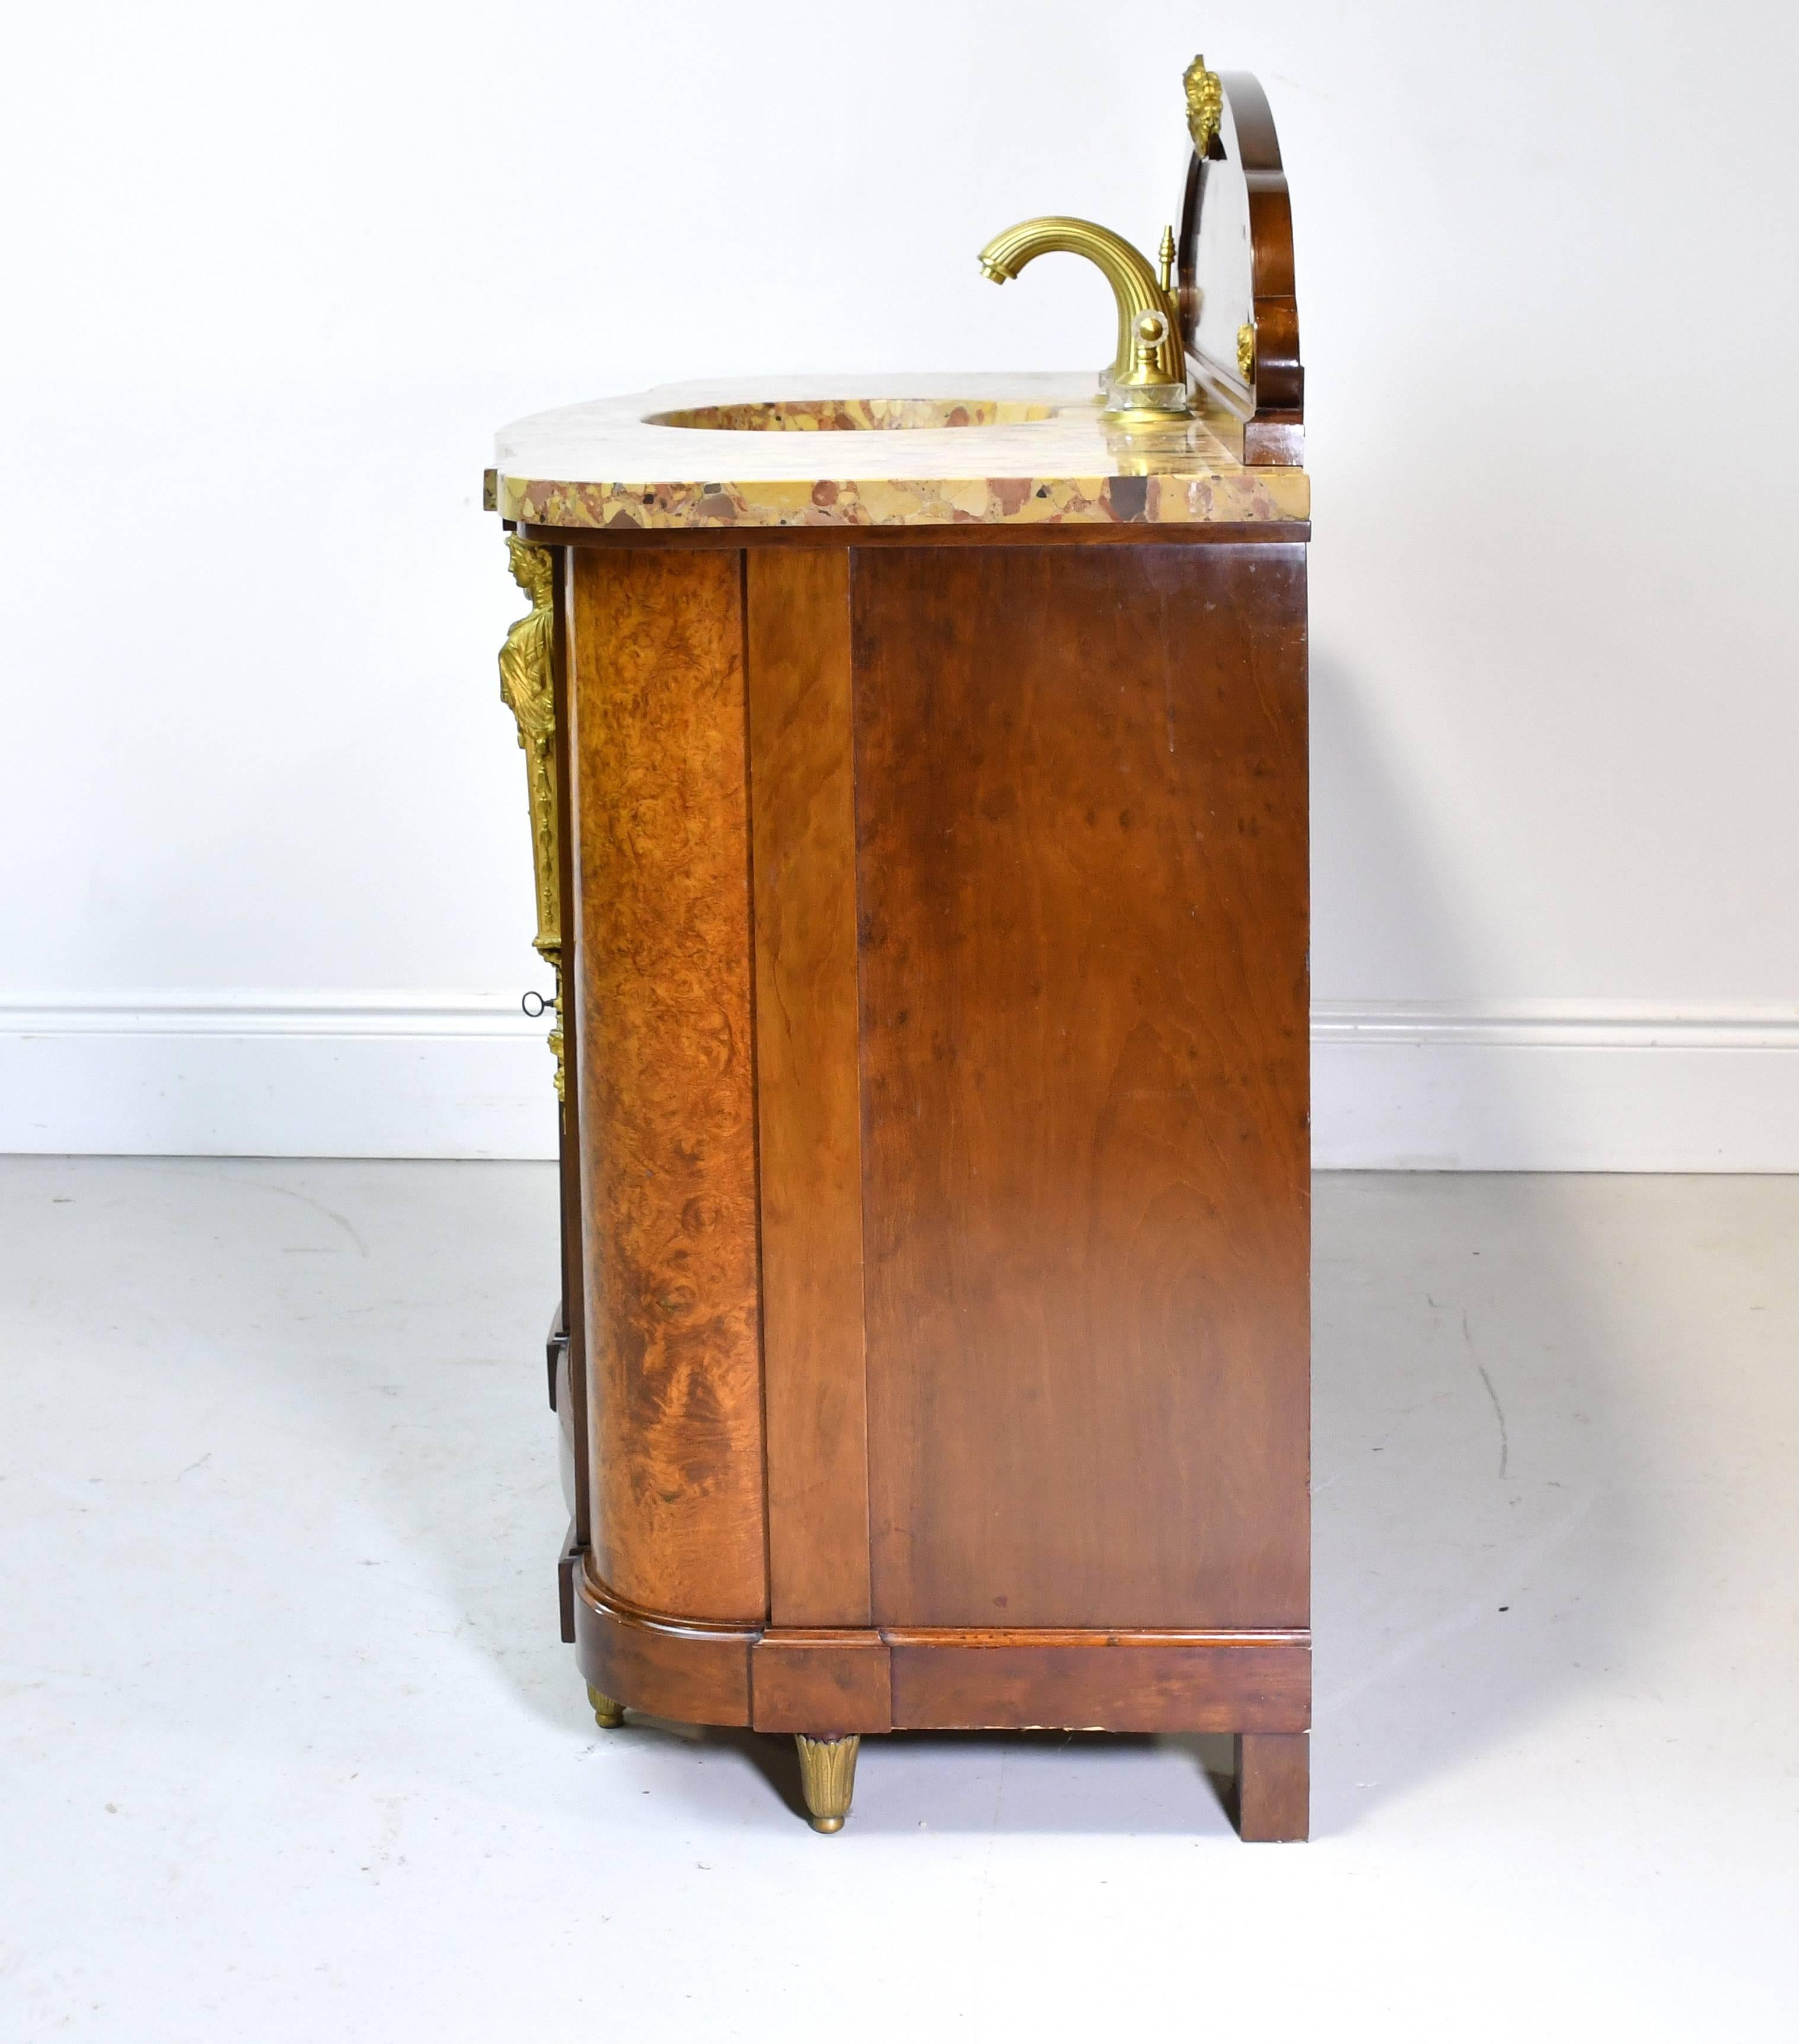 20th Century Pair of Antique French Empire-Style Bathroom Vanities with Ormolu & Marble Tops